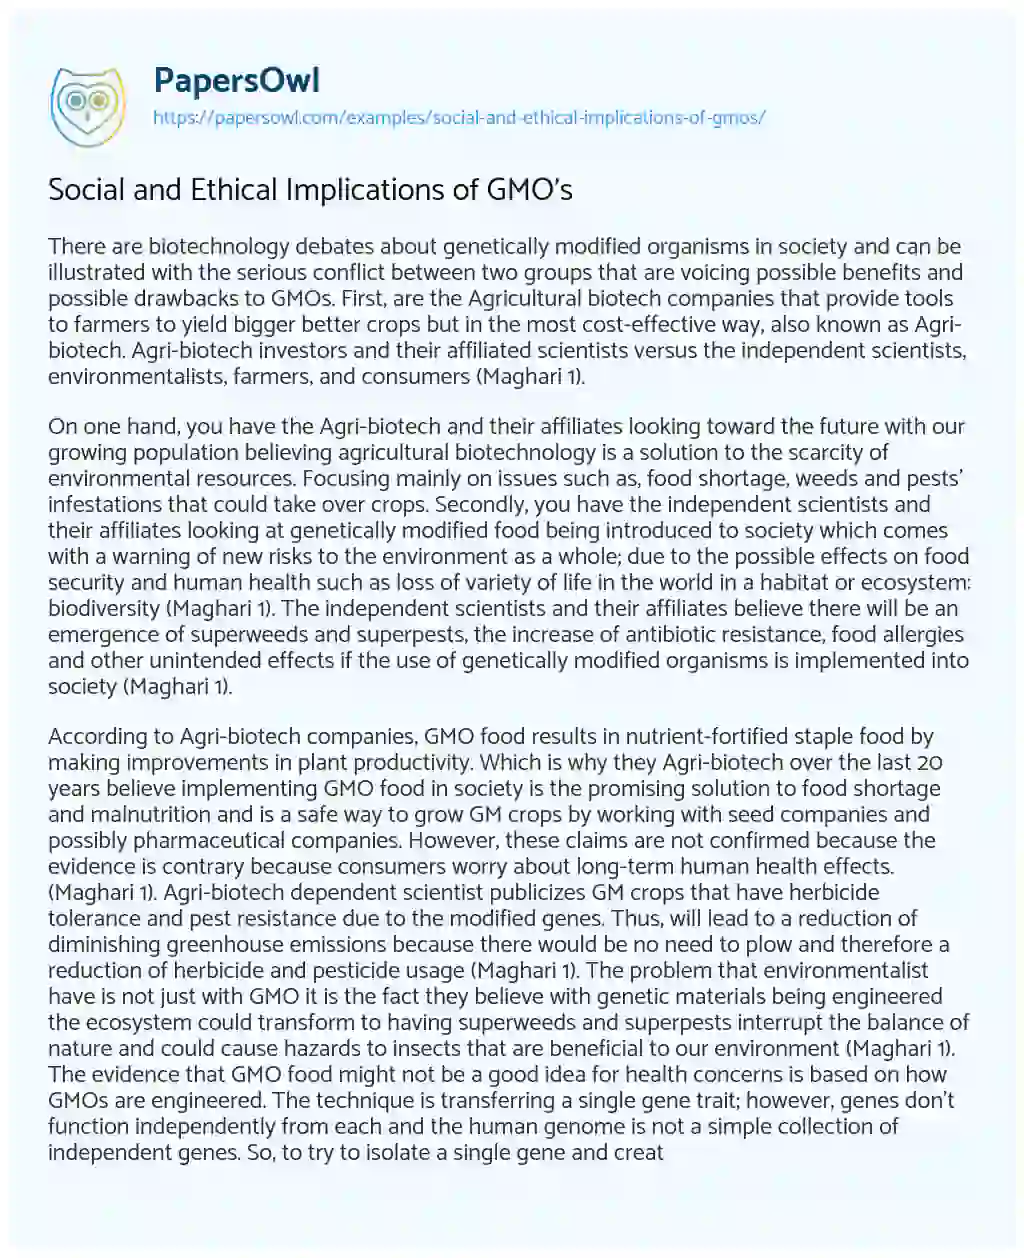 Essay on Social and Ethical Implications of GMO’s